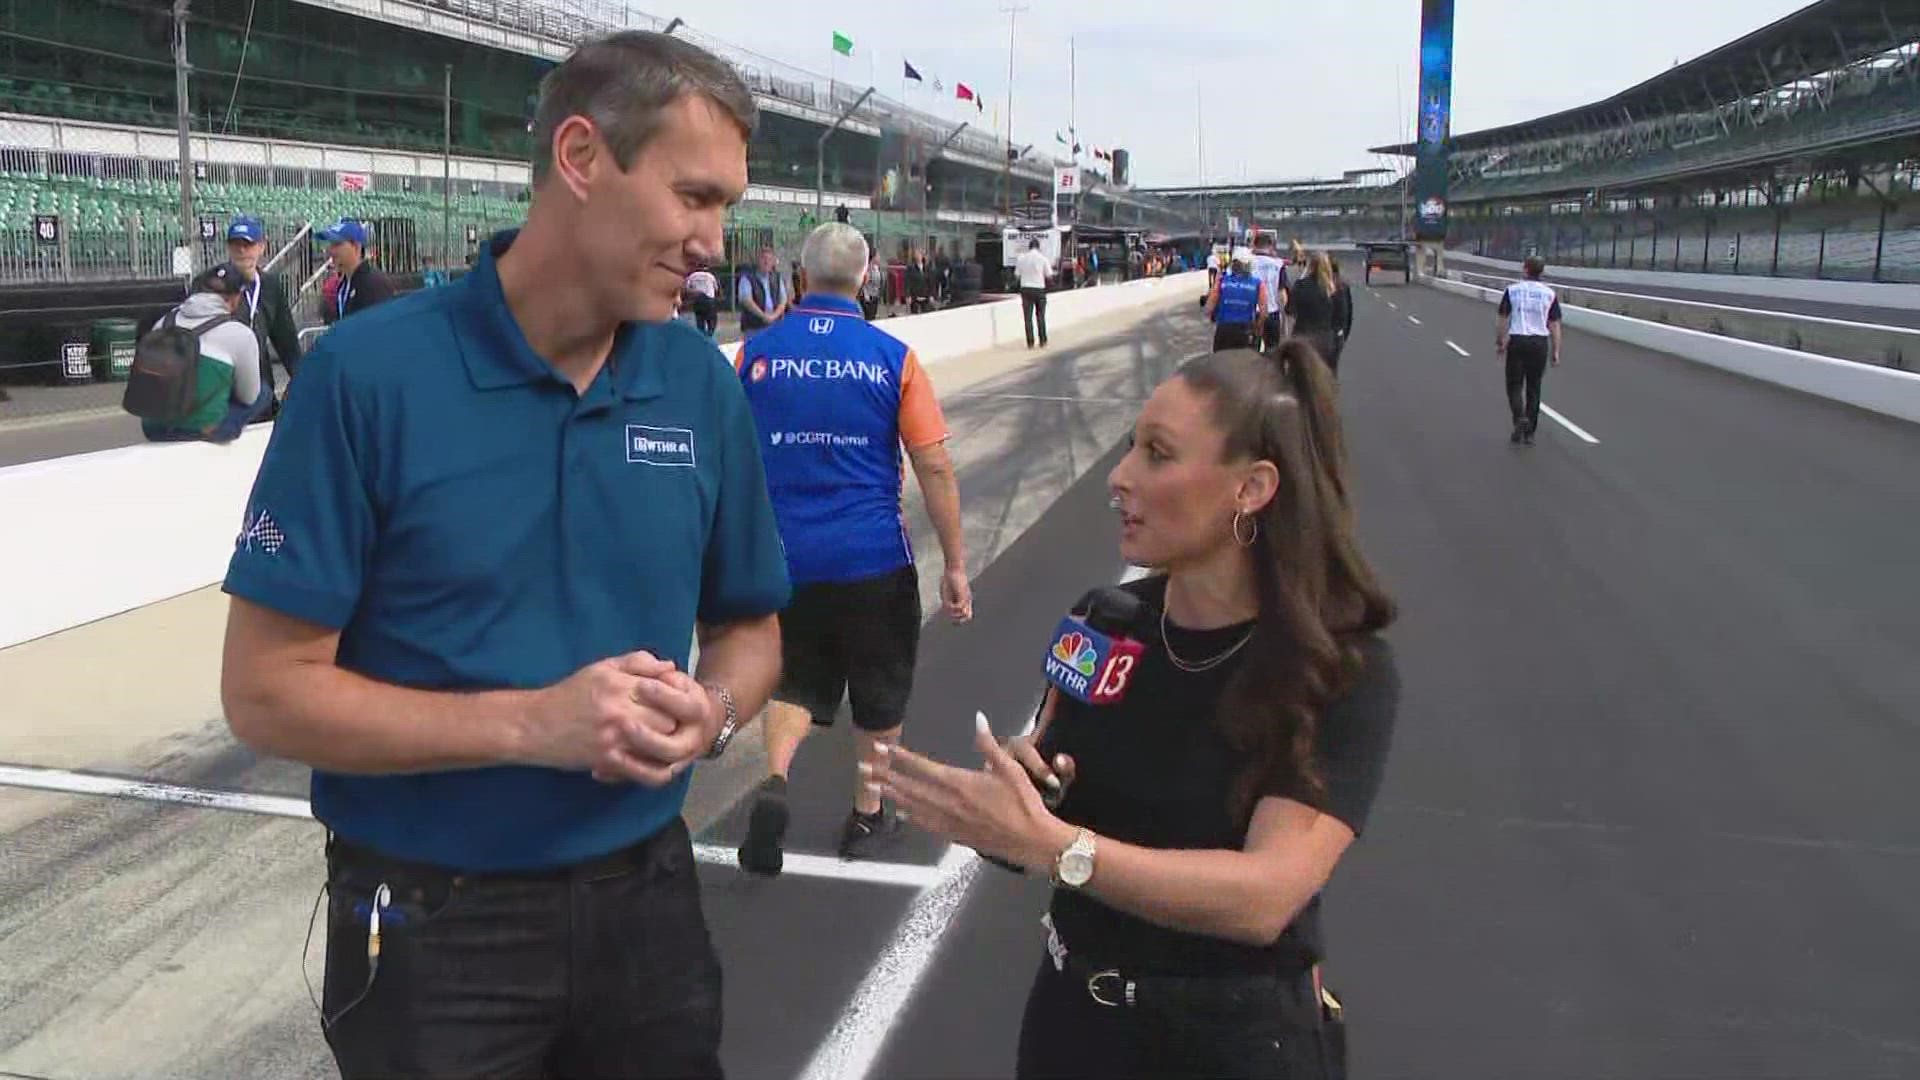 Rich Nye and Taylor Tannebaum talk about changes to qualifying and the upcoming Indianapolis 500.